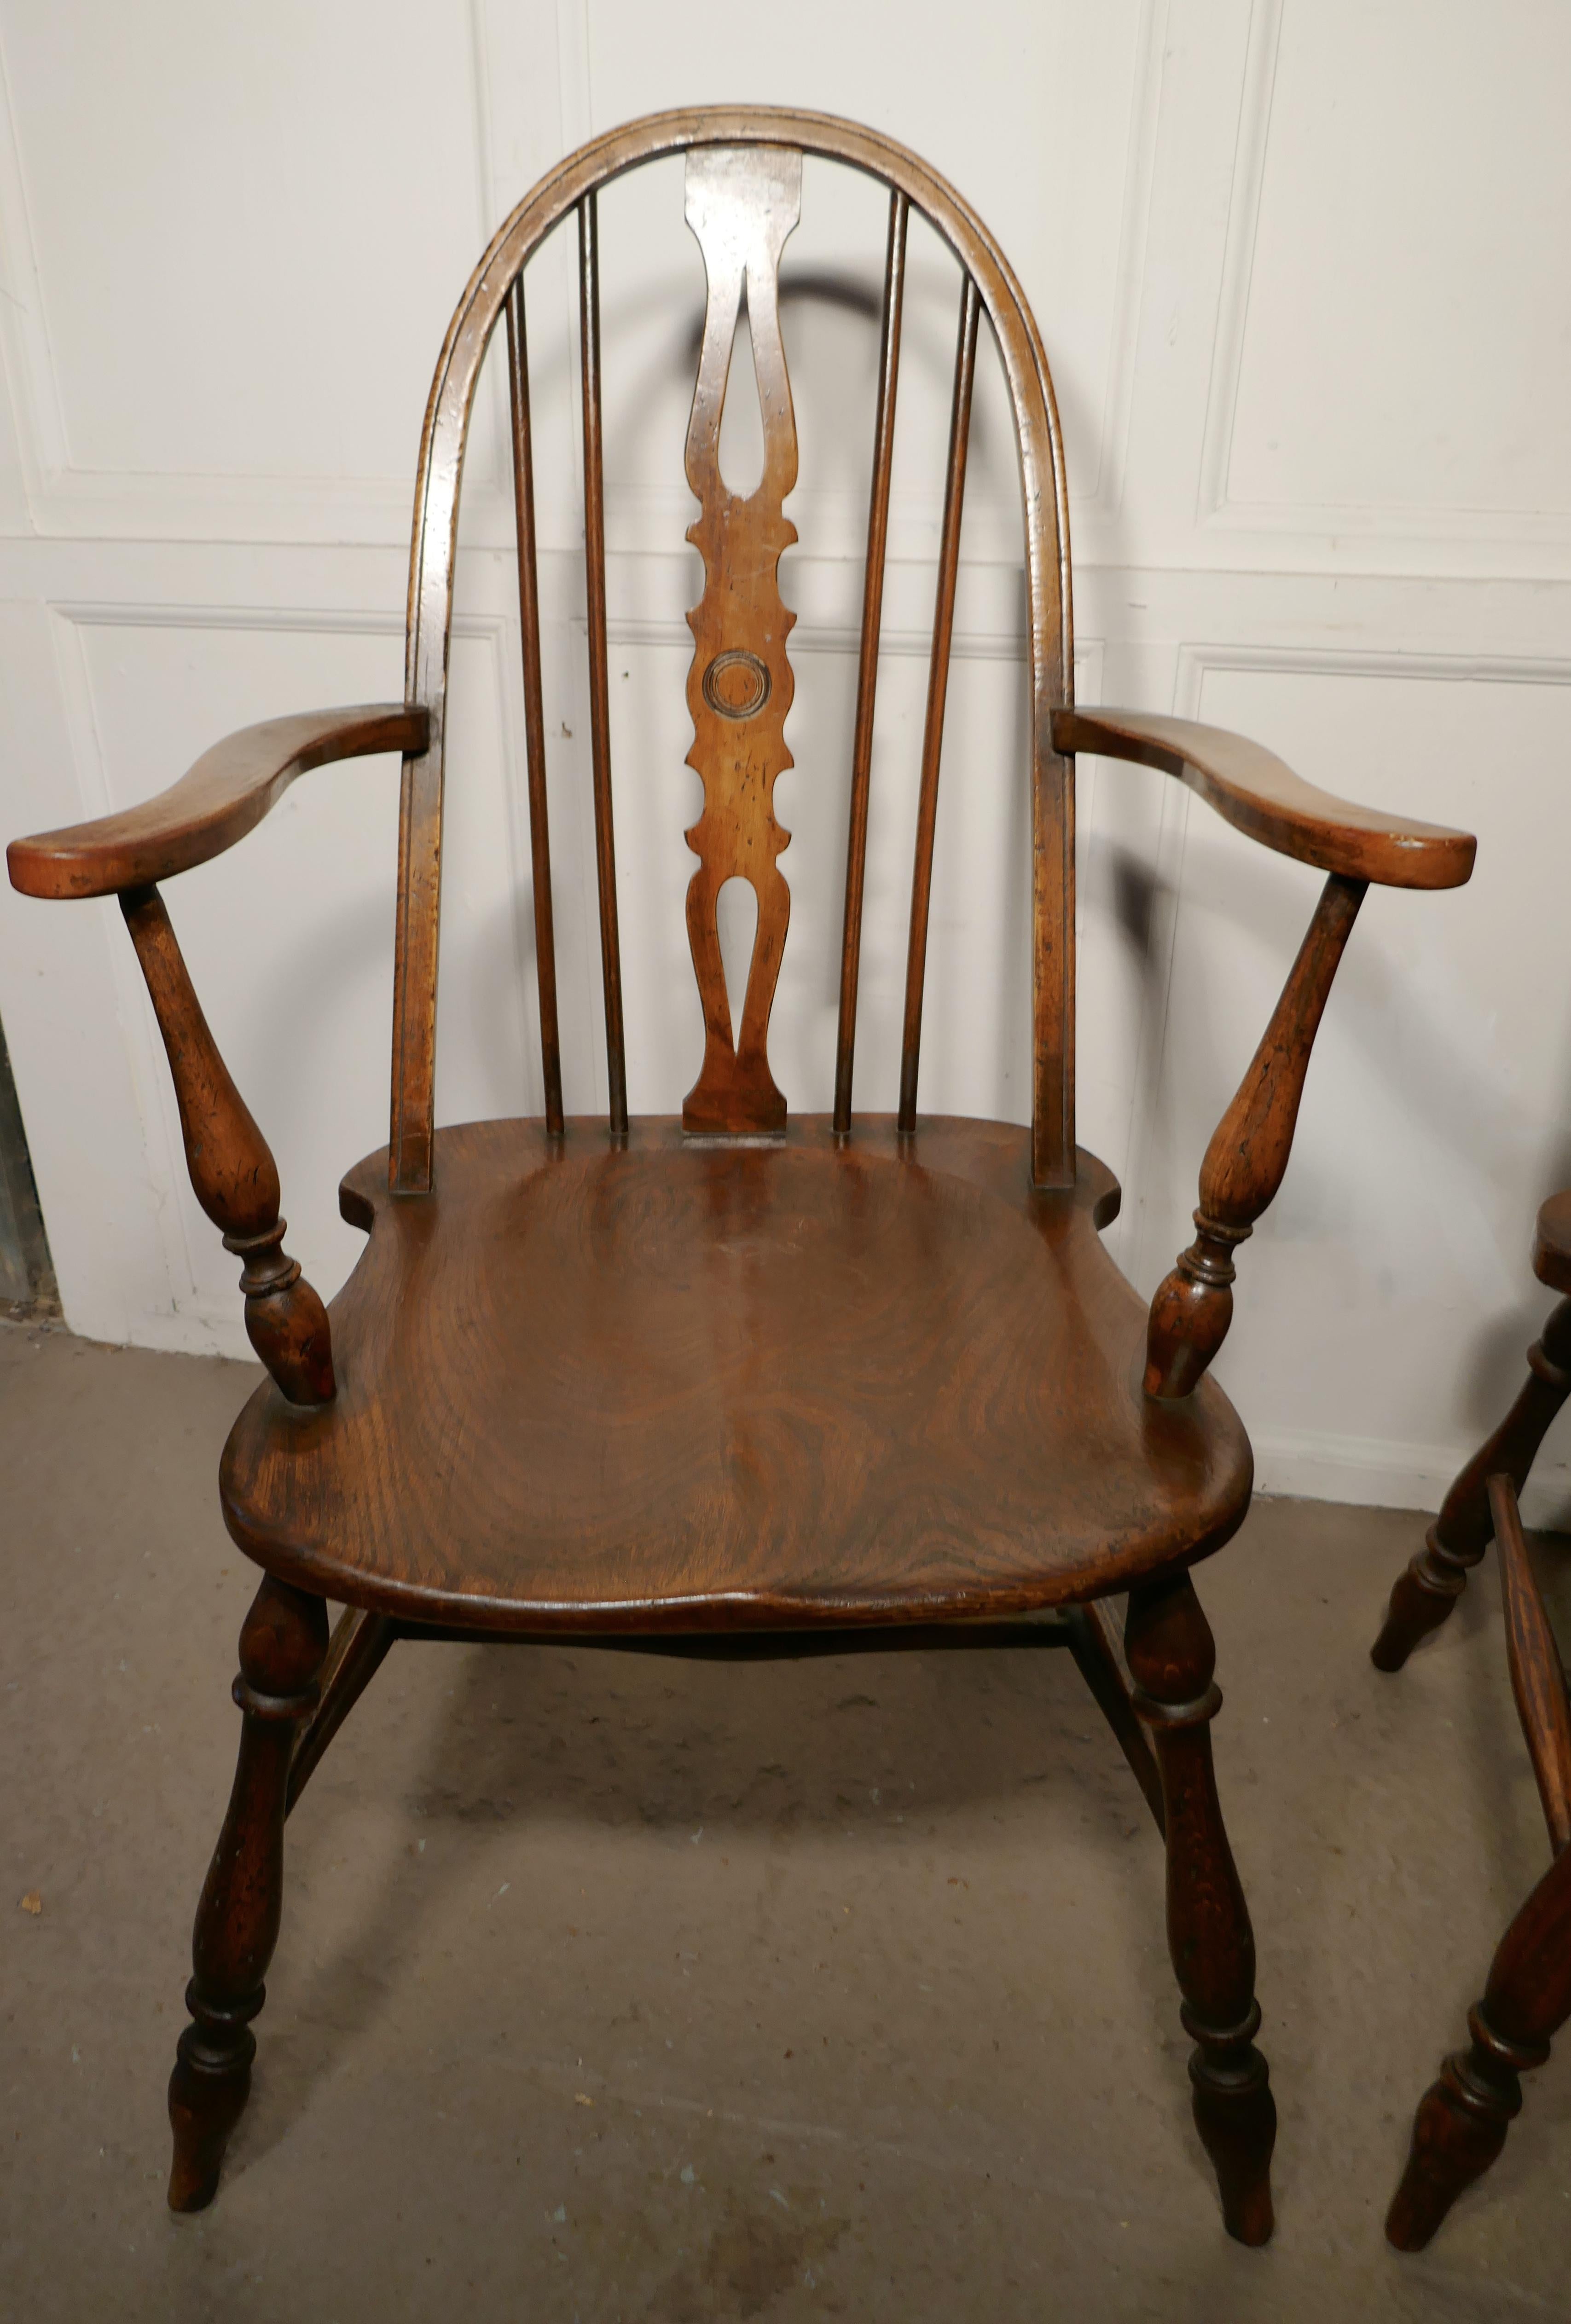 Set of 6 beech & elm Arts & Crafts high back English windsor chairs, 

Set of 6, 2 carvers and 4 single chairs
The chairs are true set and have superb Saddle shaped solid elm seats with spindle backs in the Arts & Crafts style 
The chairs have